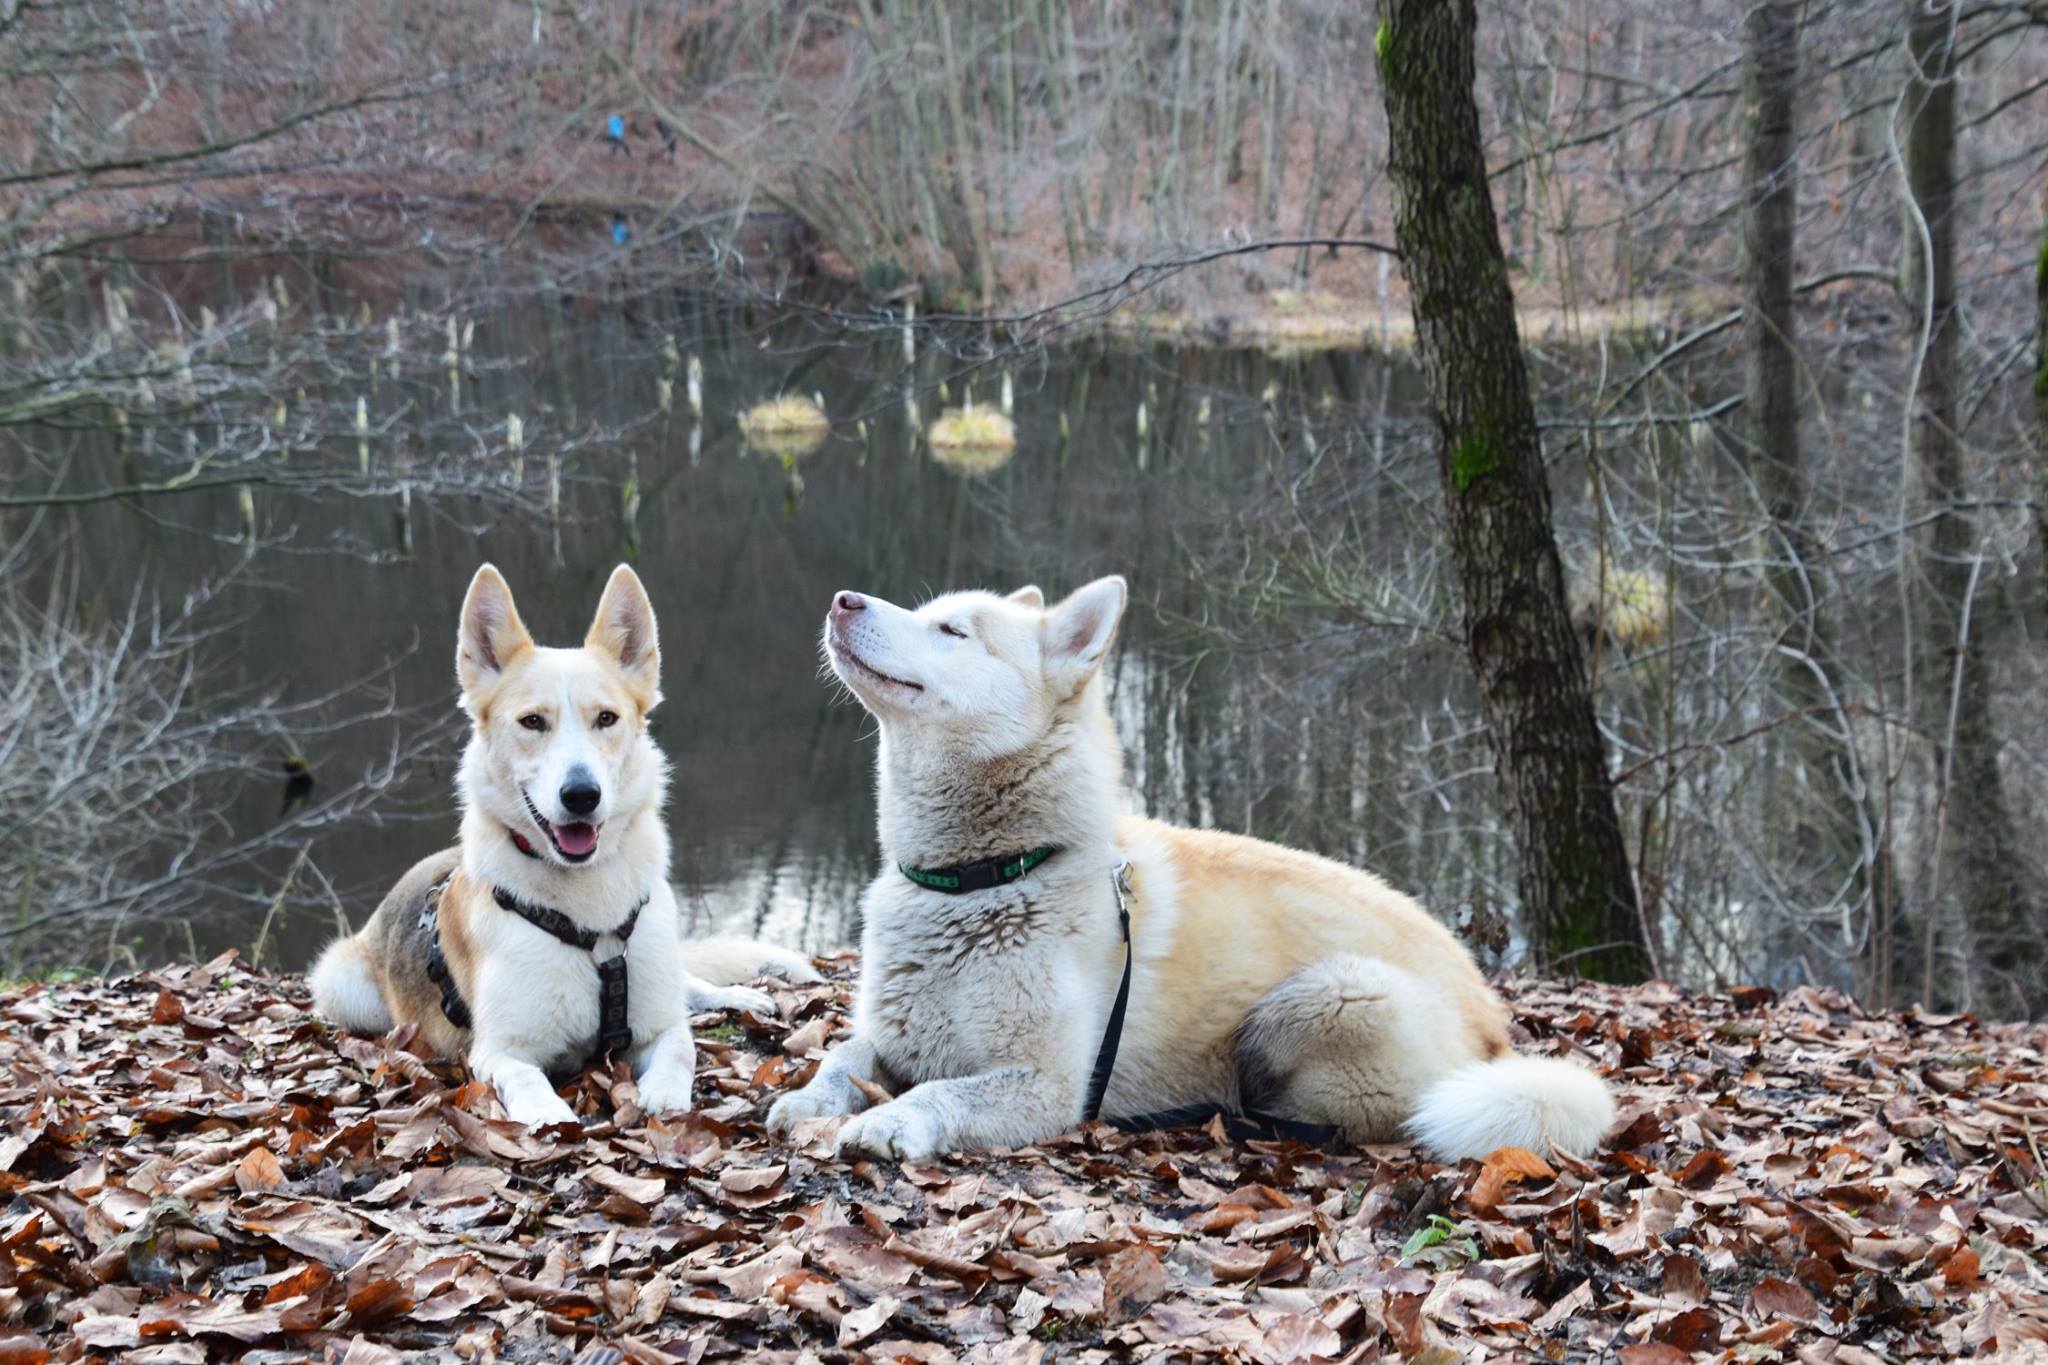 Dogs enjoy going on hikes – millions of smells await to be discovered by their noses